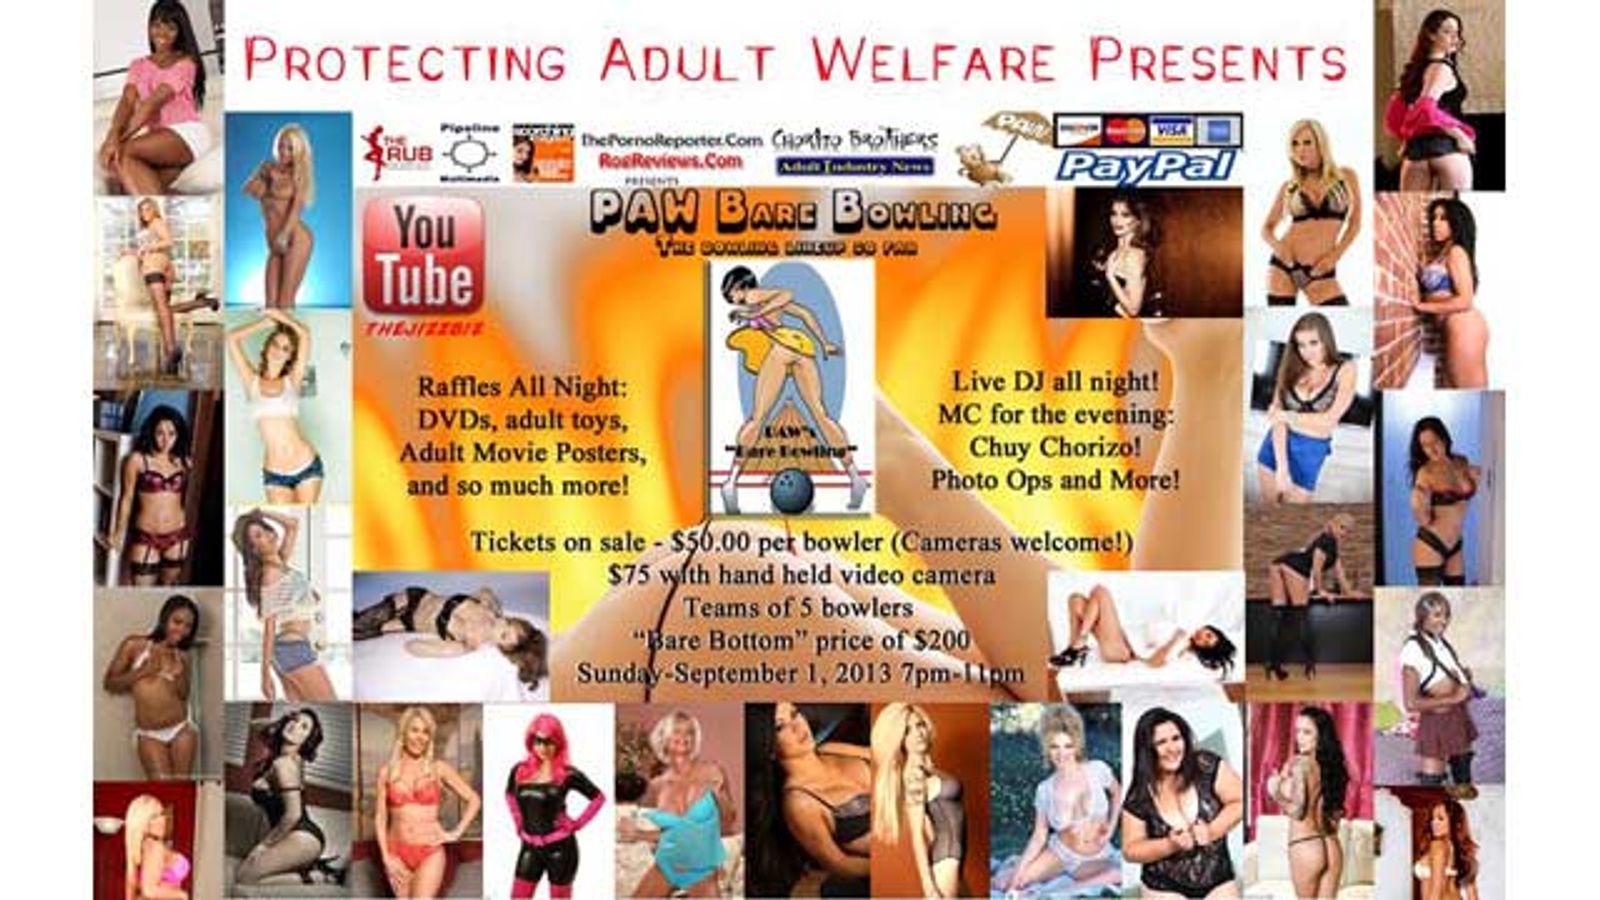 Protecting Adult Welfare's Bare Bowling Fundraiser is Back